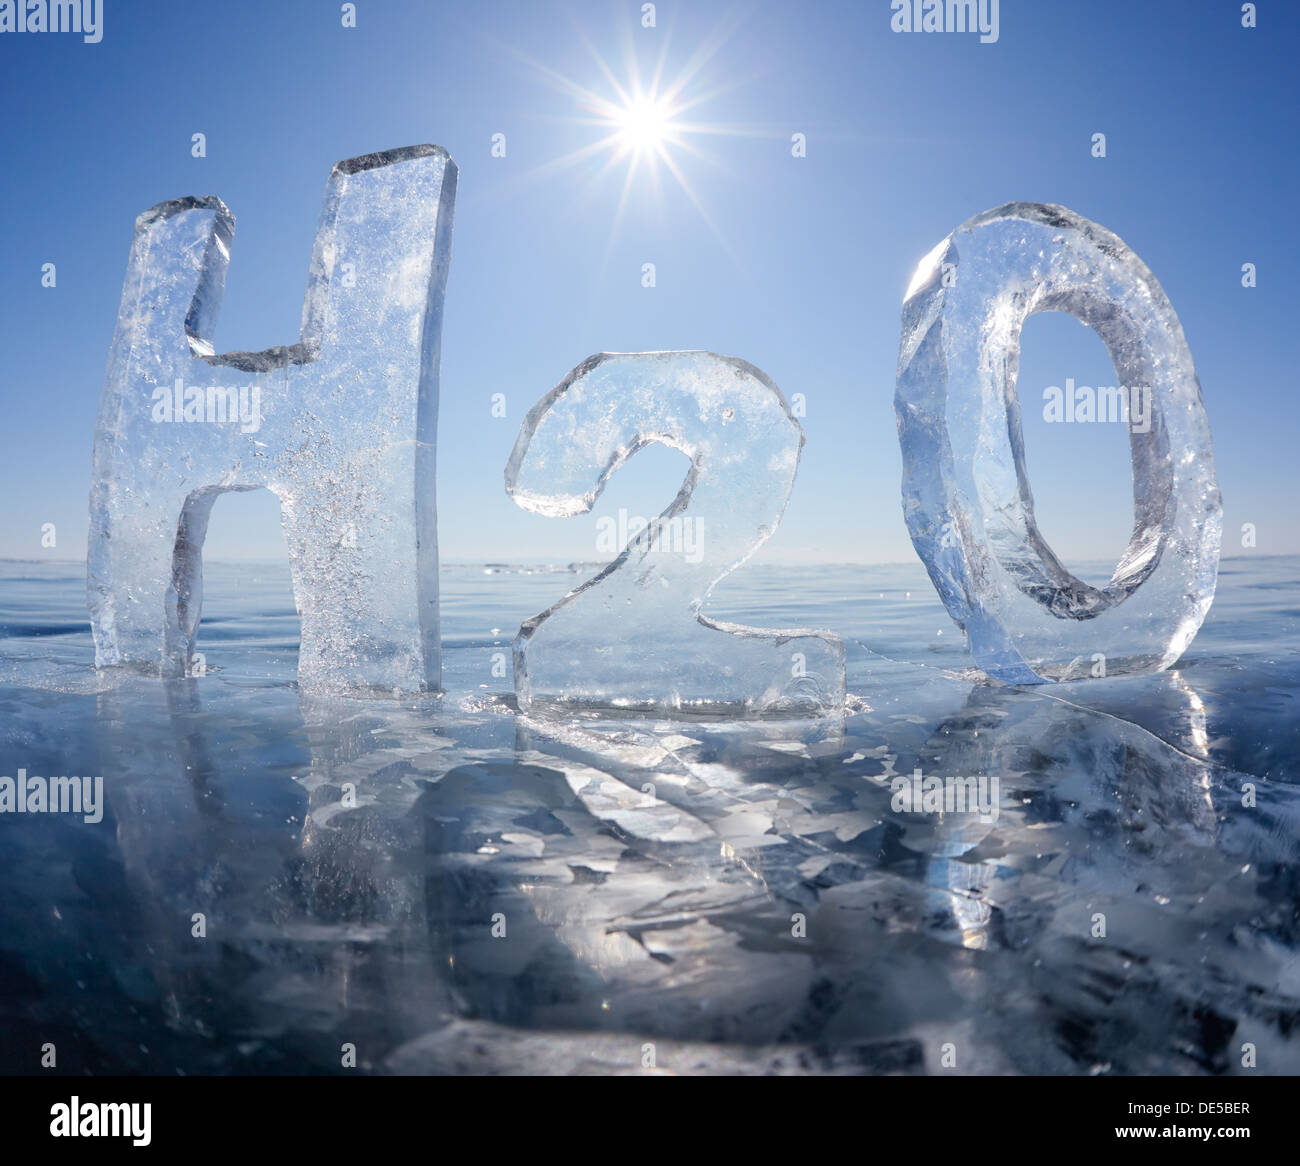 Chemical formula of water H2O made from ice on winter frozen lake Baikal  Stock Photo